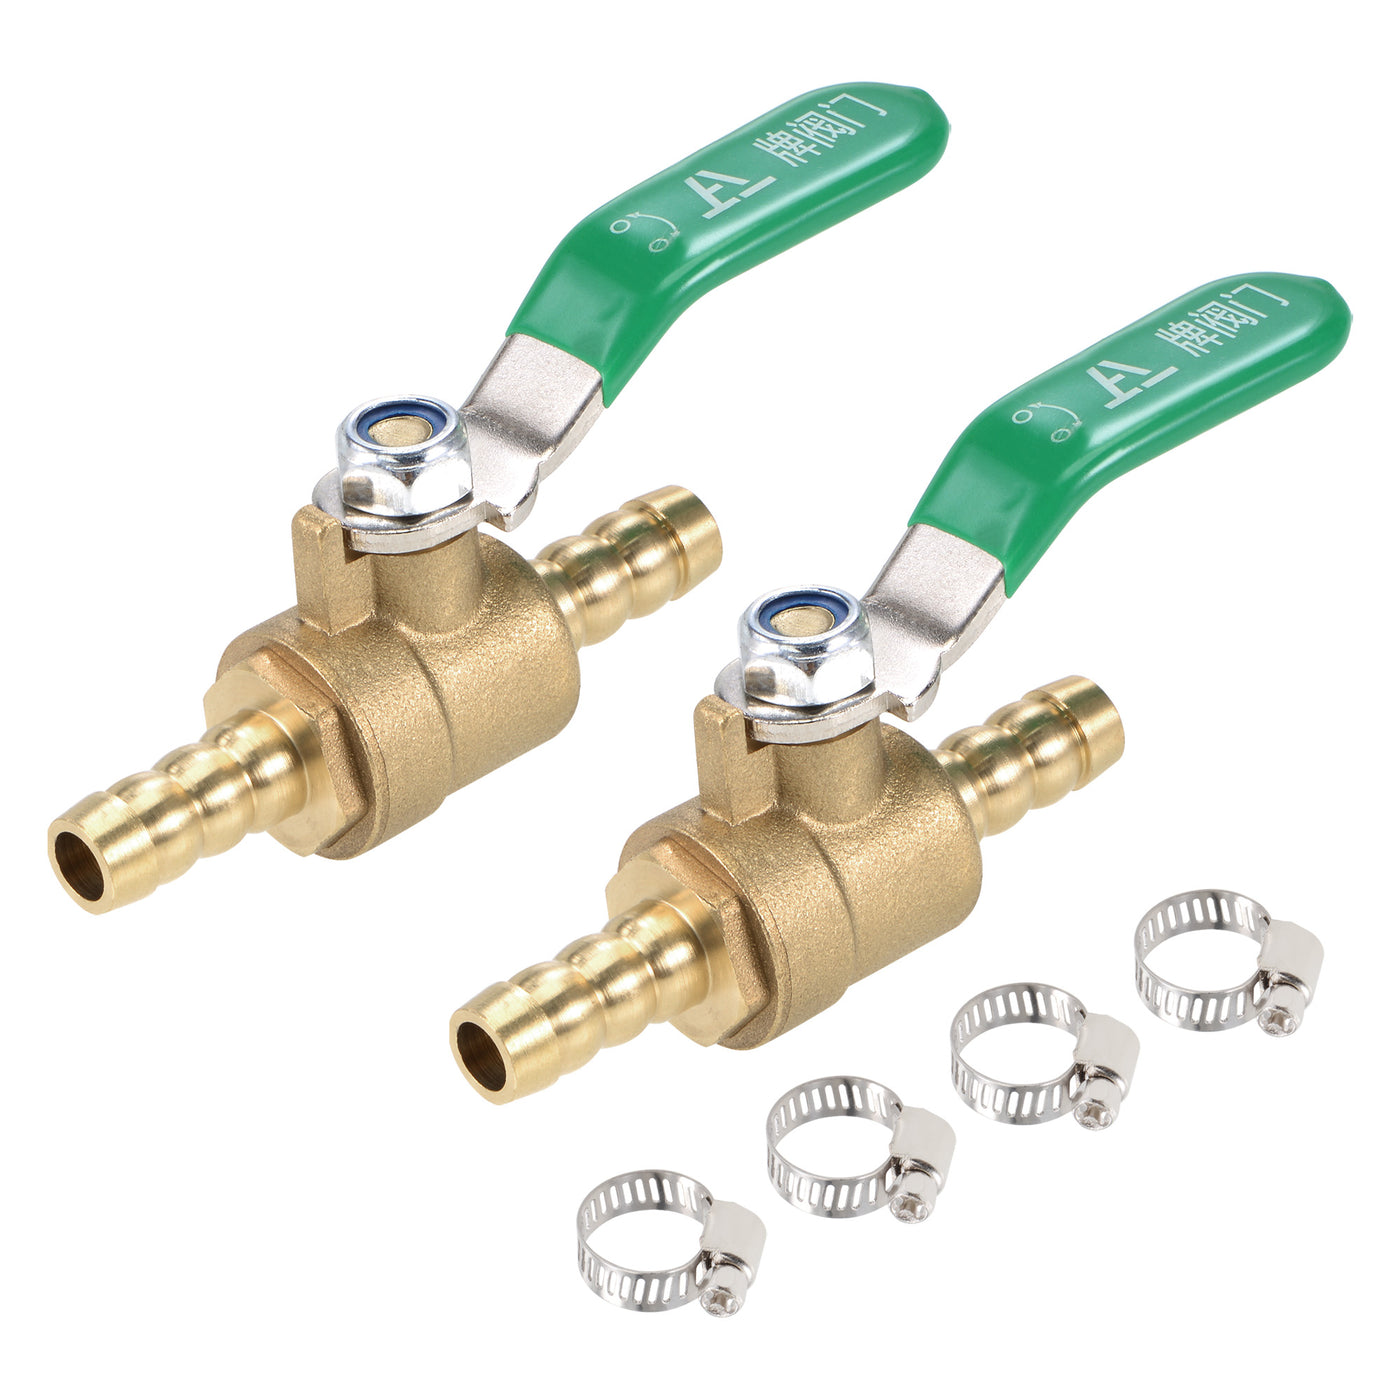 Uxcell Uxcell Brass Air Ball Valve Shut Off Switch 8mm Hose Barb to 8mm Hose Barb with Clamps Green Handle 2Pcs